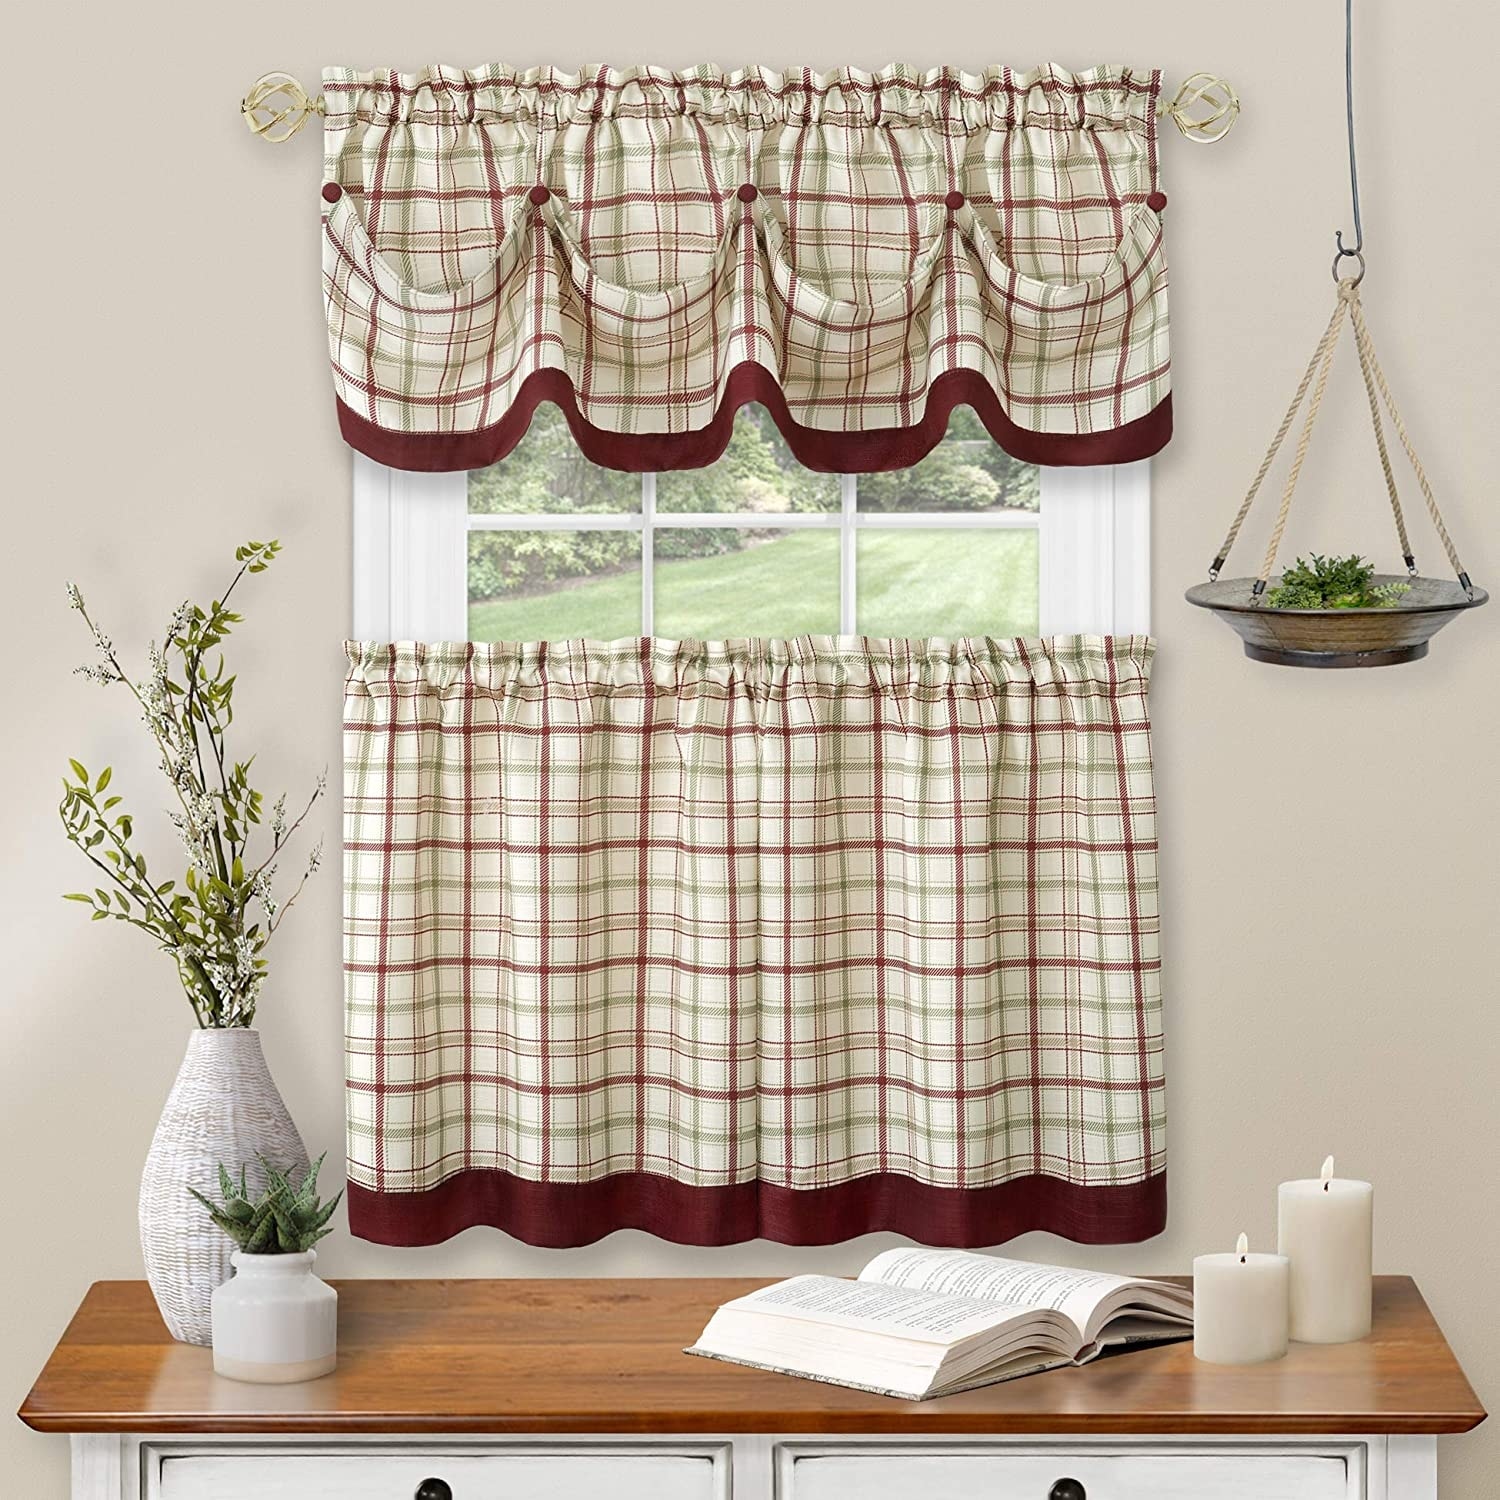 Regal Home Collections Shabby Trellis Kitchen Curtain Set Assorted Colors 